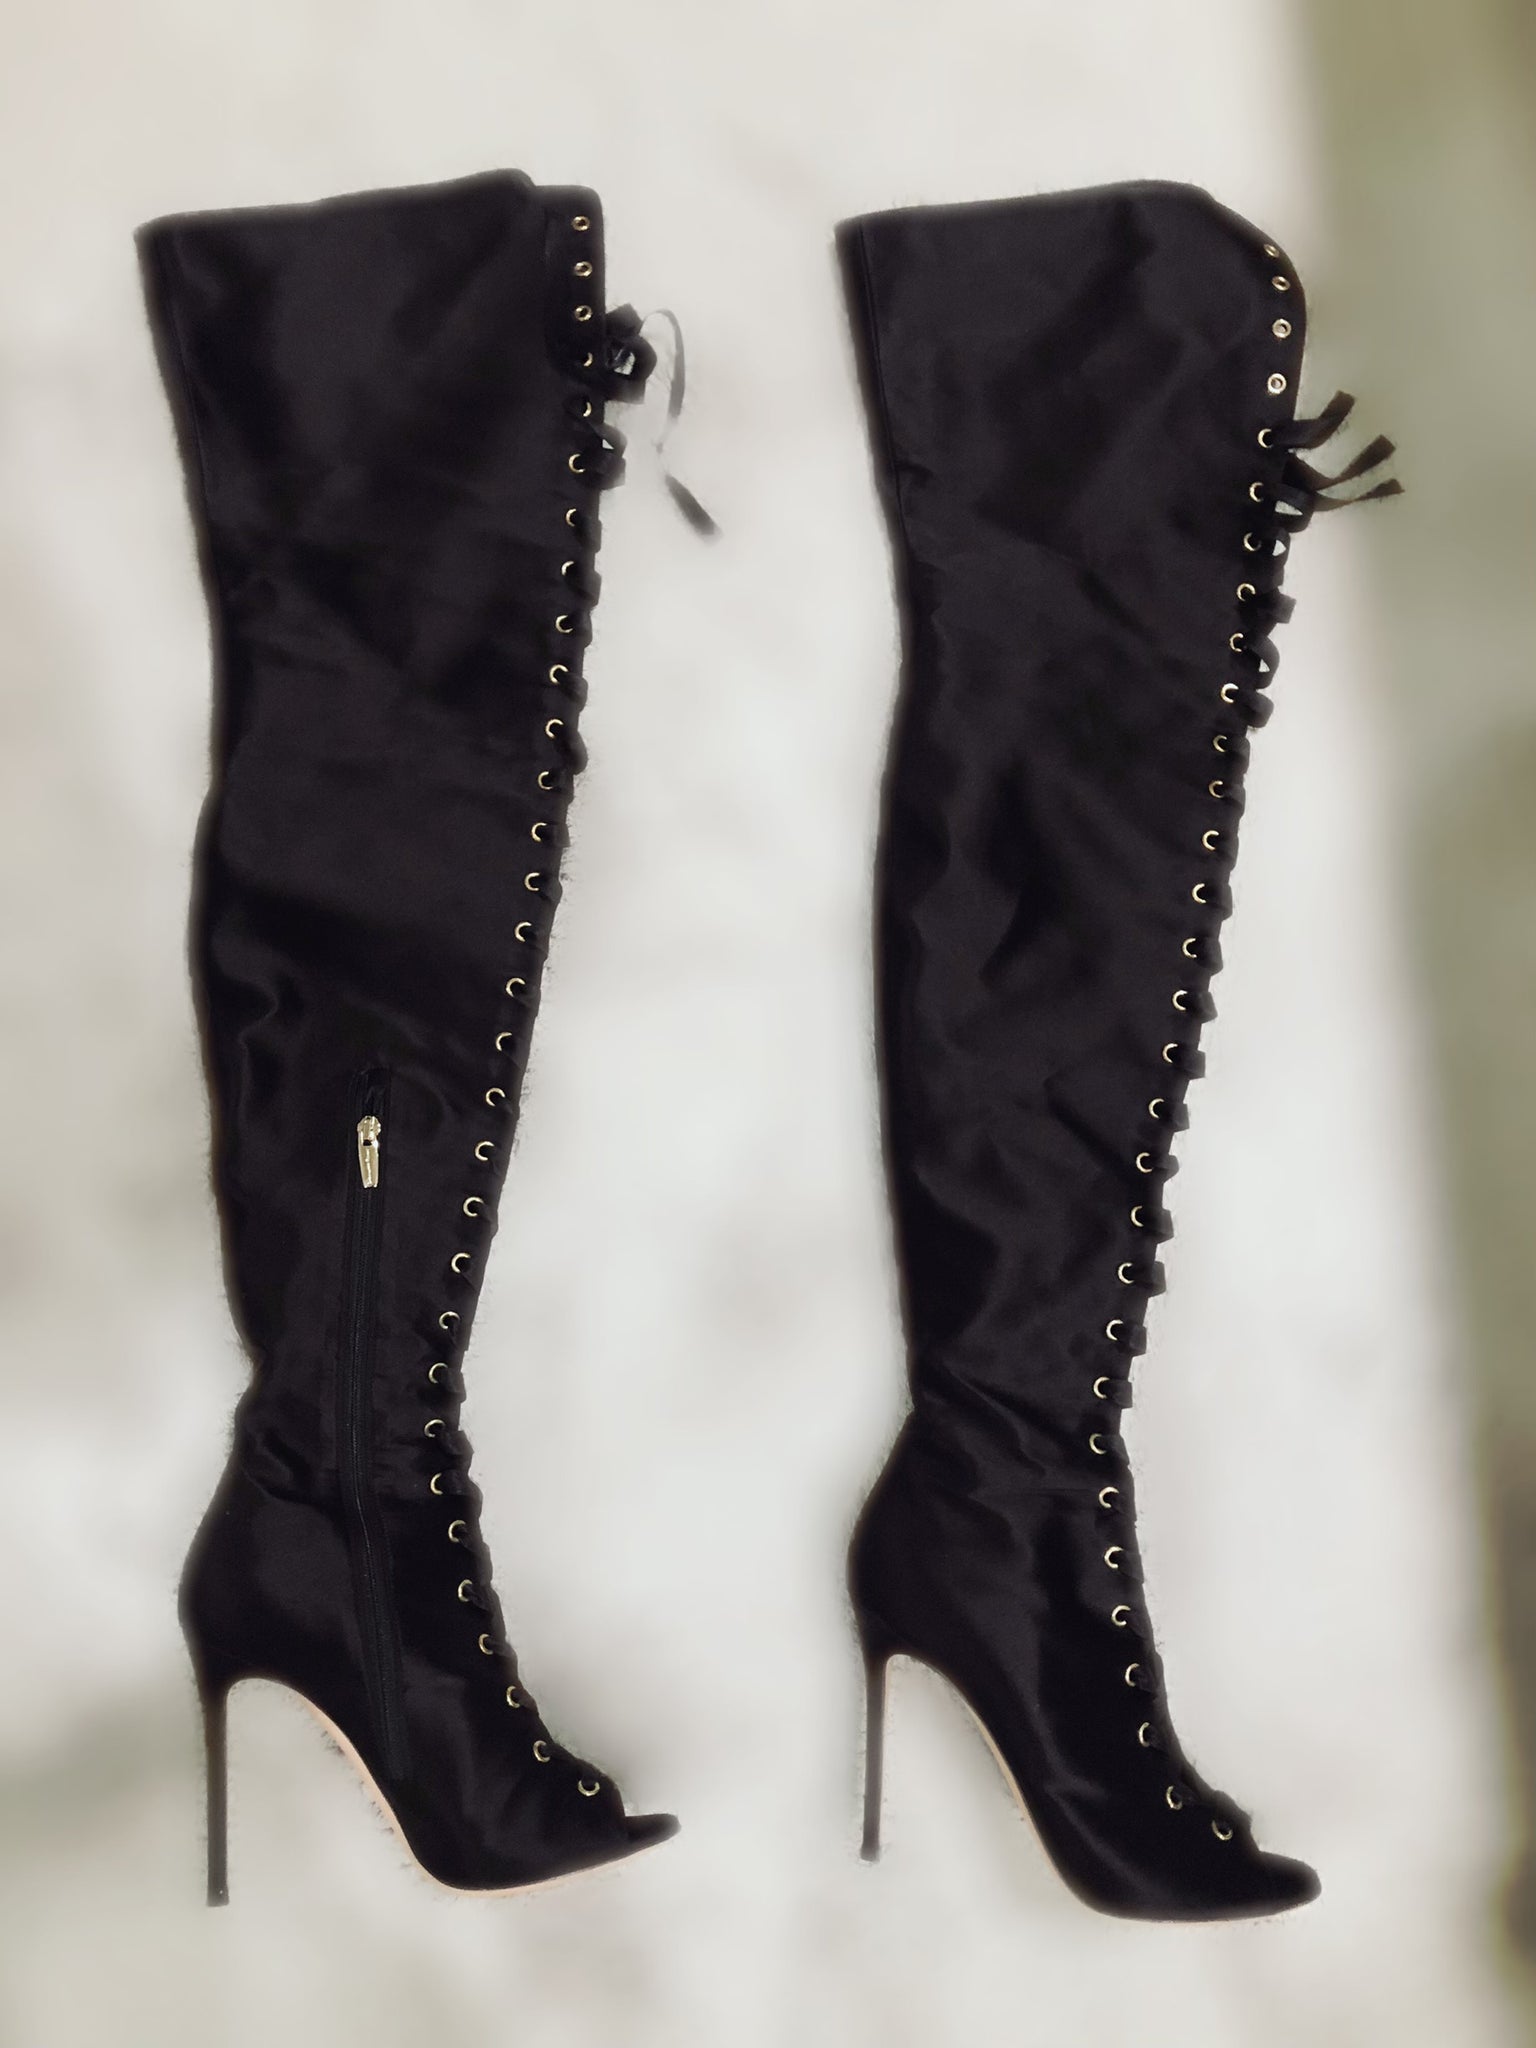 GIANVITO ROSSI Marie Black Lace-up Satin Thigh-High Stiletto Boots 